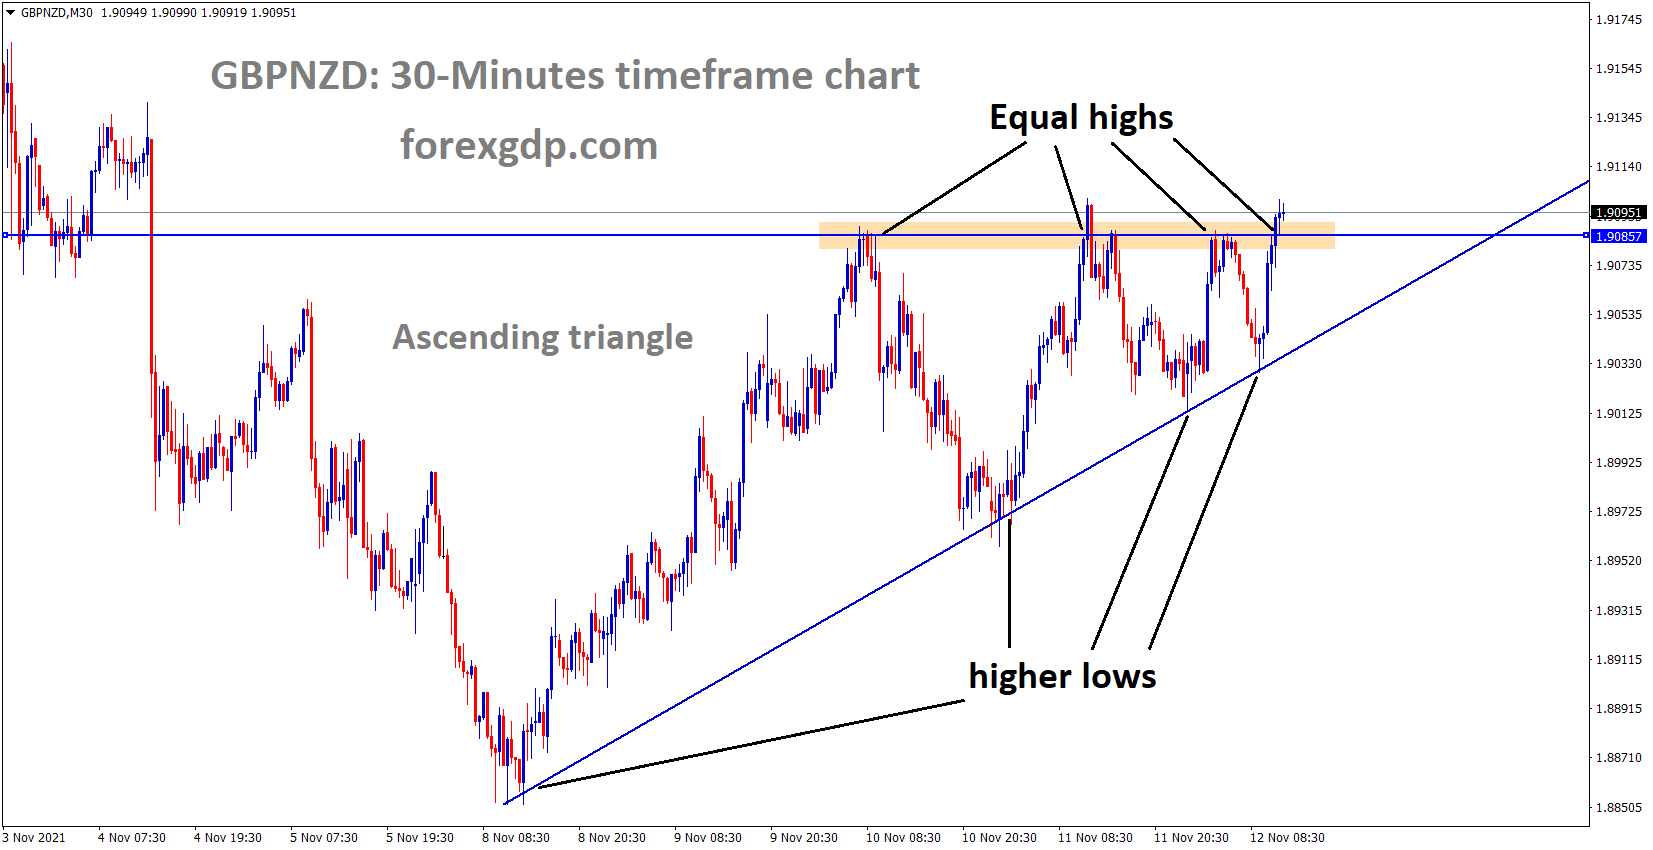 GBPNZD is moving in an ascending triangle pattern and the market reached the equal heights